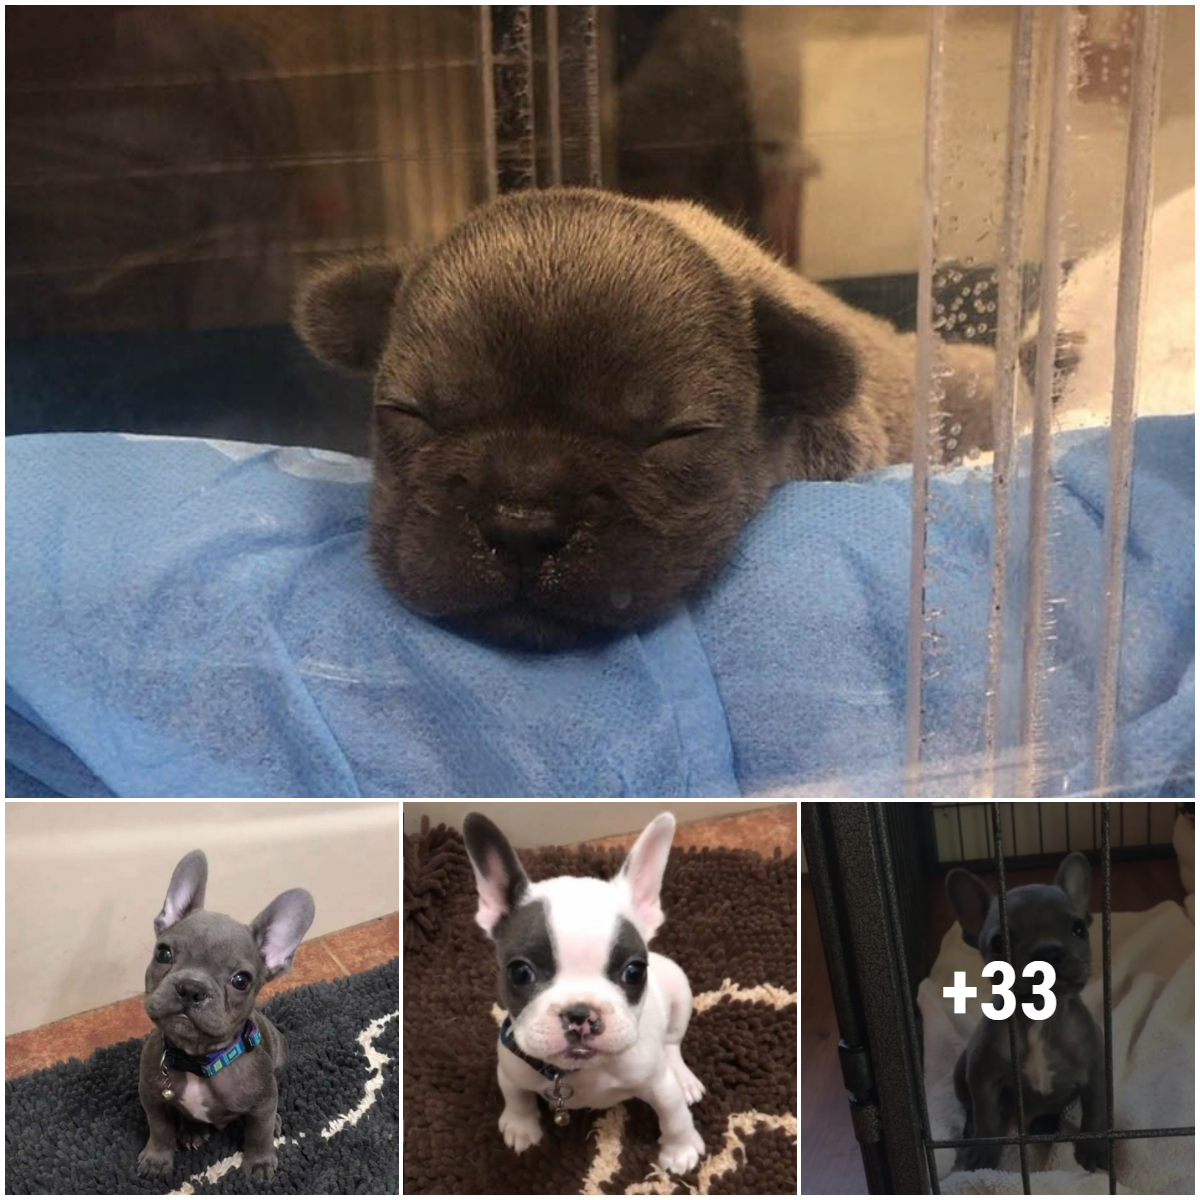 Heartwarming story when a little French Bulldog with a cleft palate was rescued and he was also rescued along with his brother.